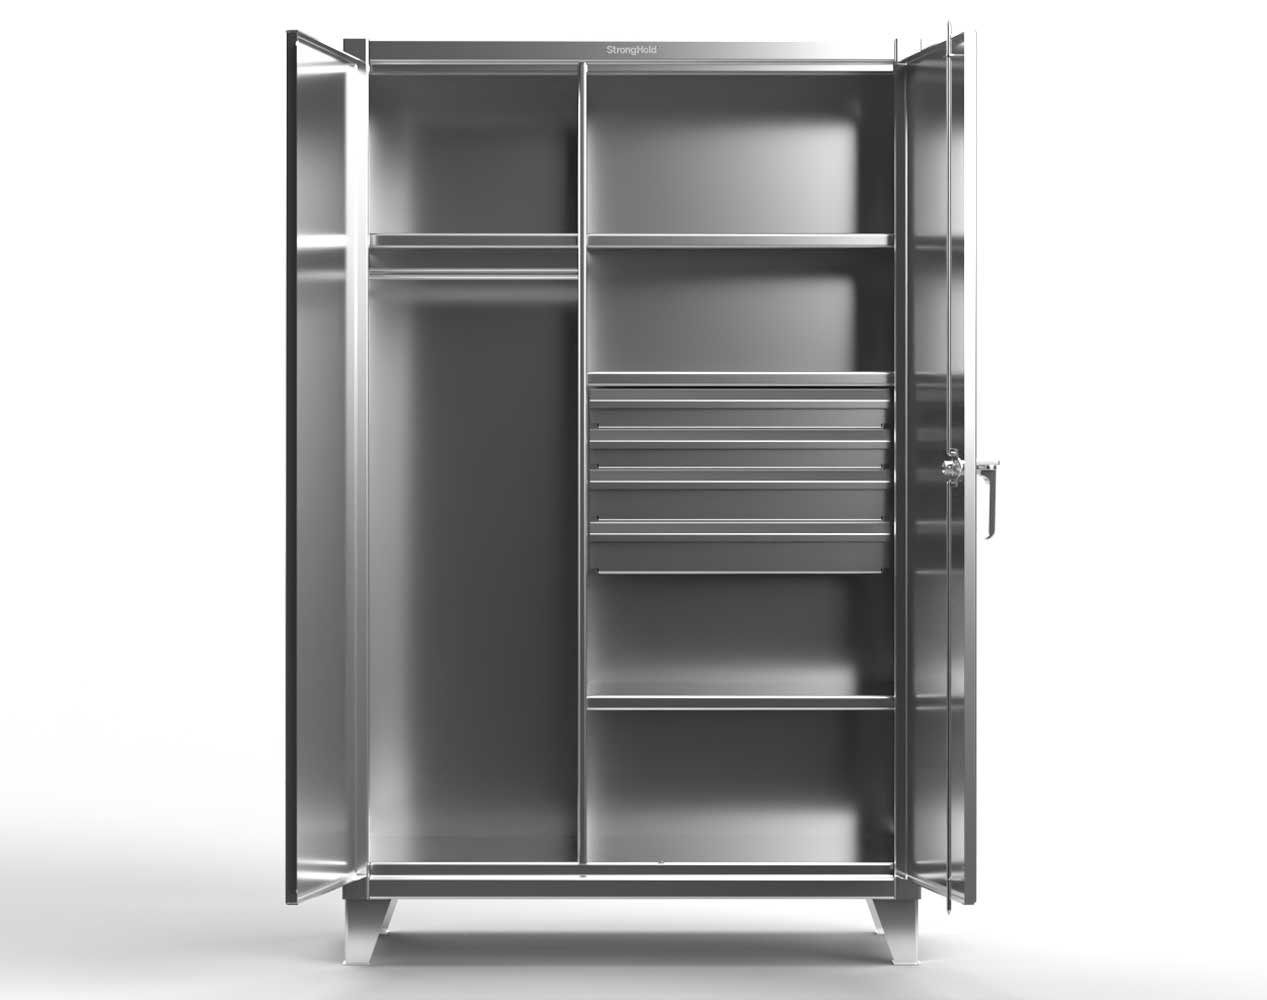 Extreme Duty 12 GA Stainless Steel Uniform Cabinet with 4 Drawers, 4 Shelves - 36 In. W x 24 In. D x 78 In. H